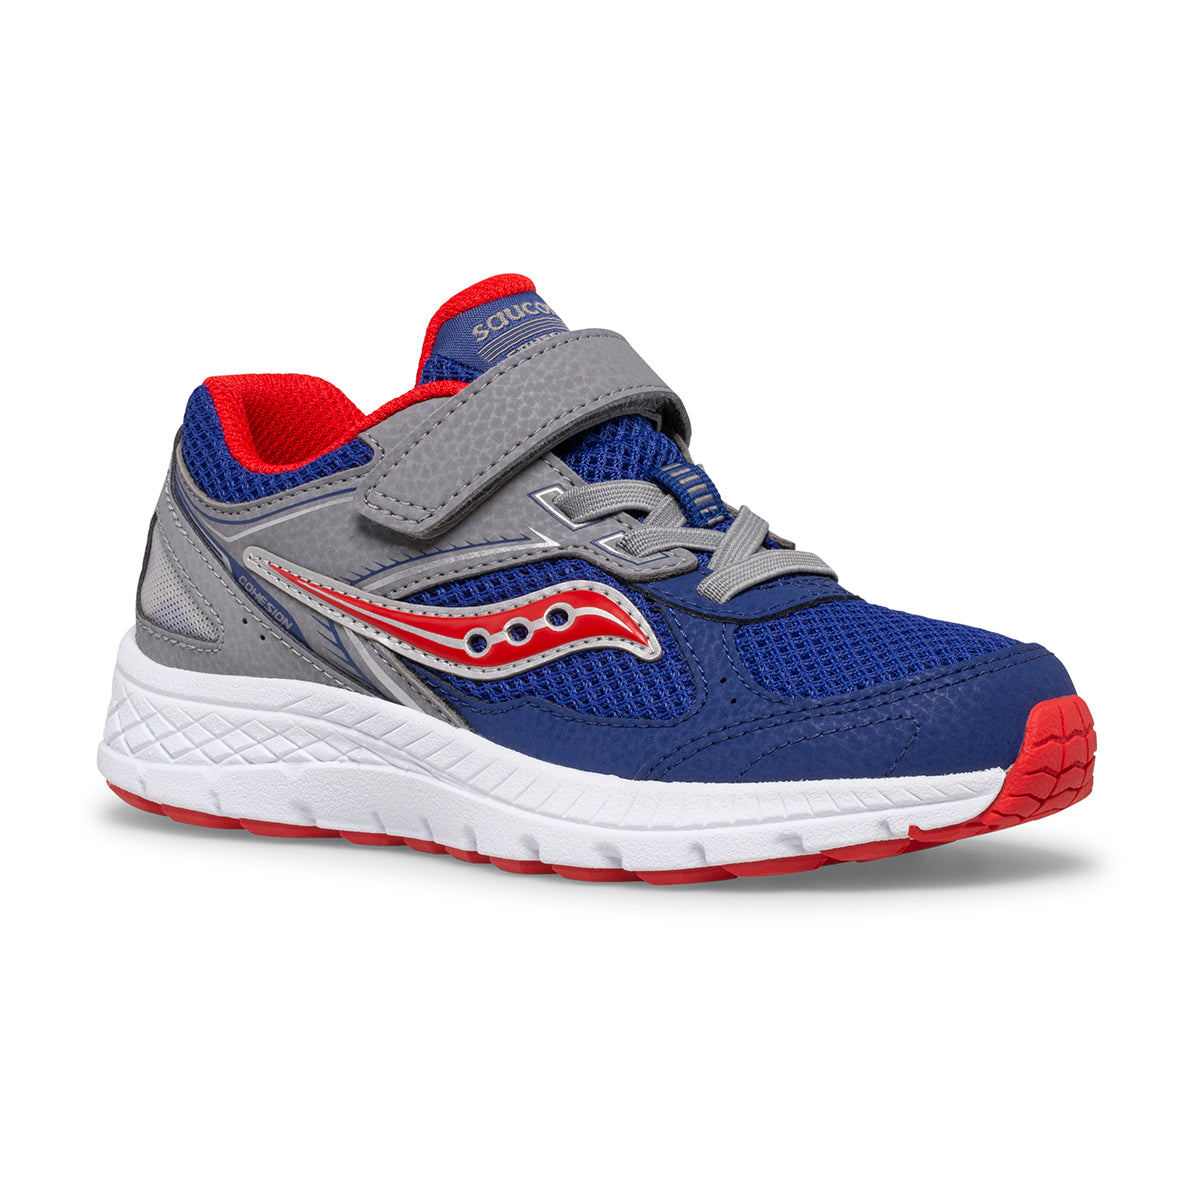 Cohesion 14 A/C Sneaker Navy/Red